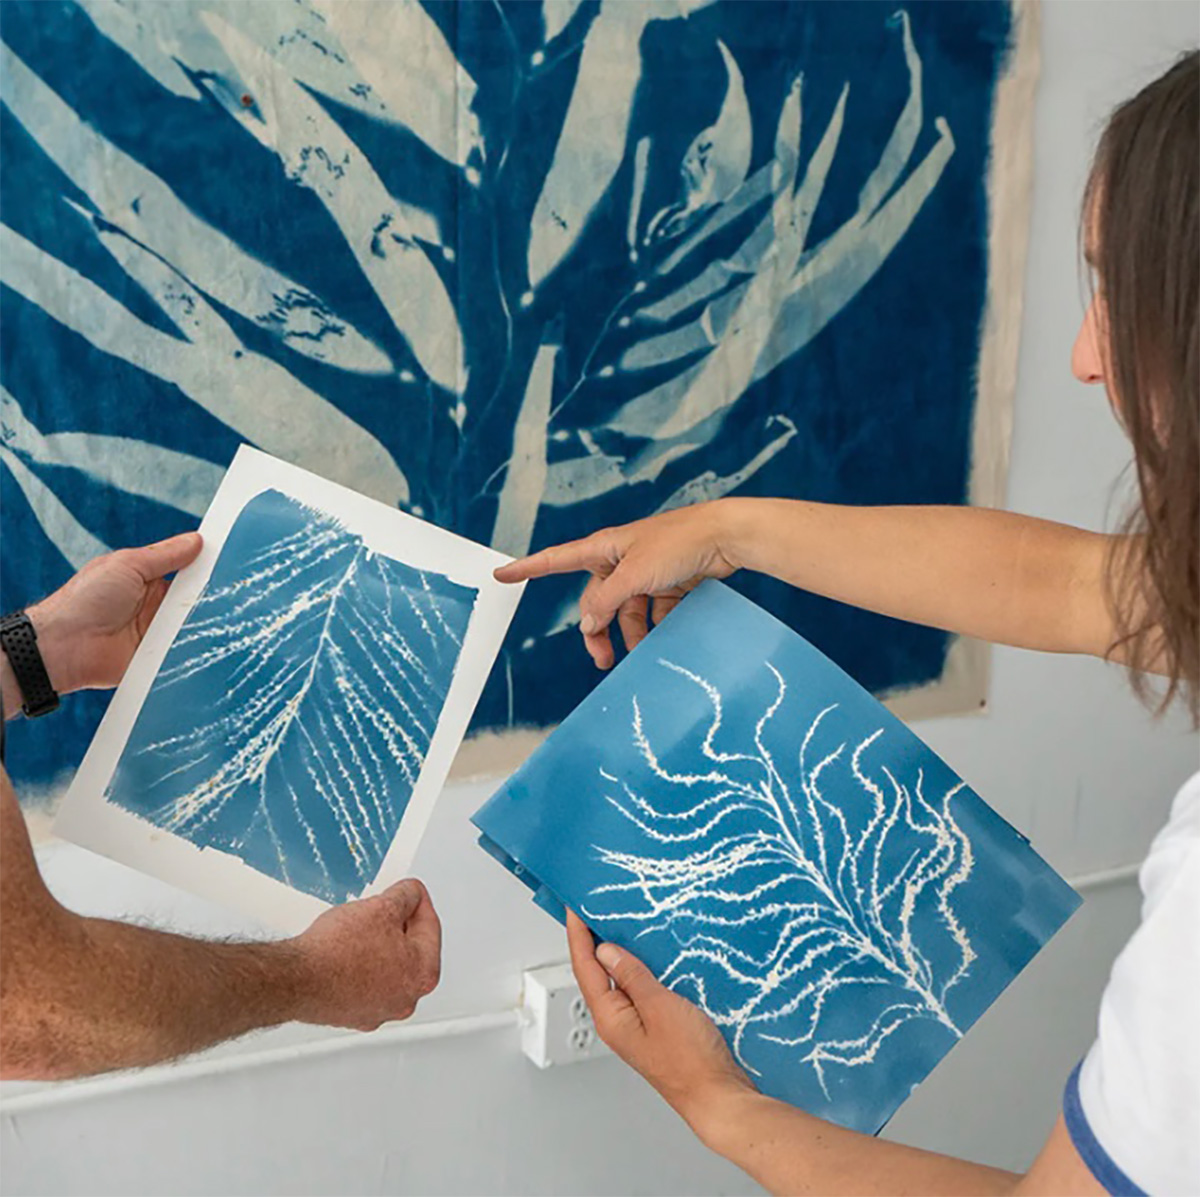 Two cyanotypes made from foraged seaweed being held up for photograph.